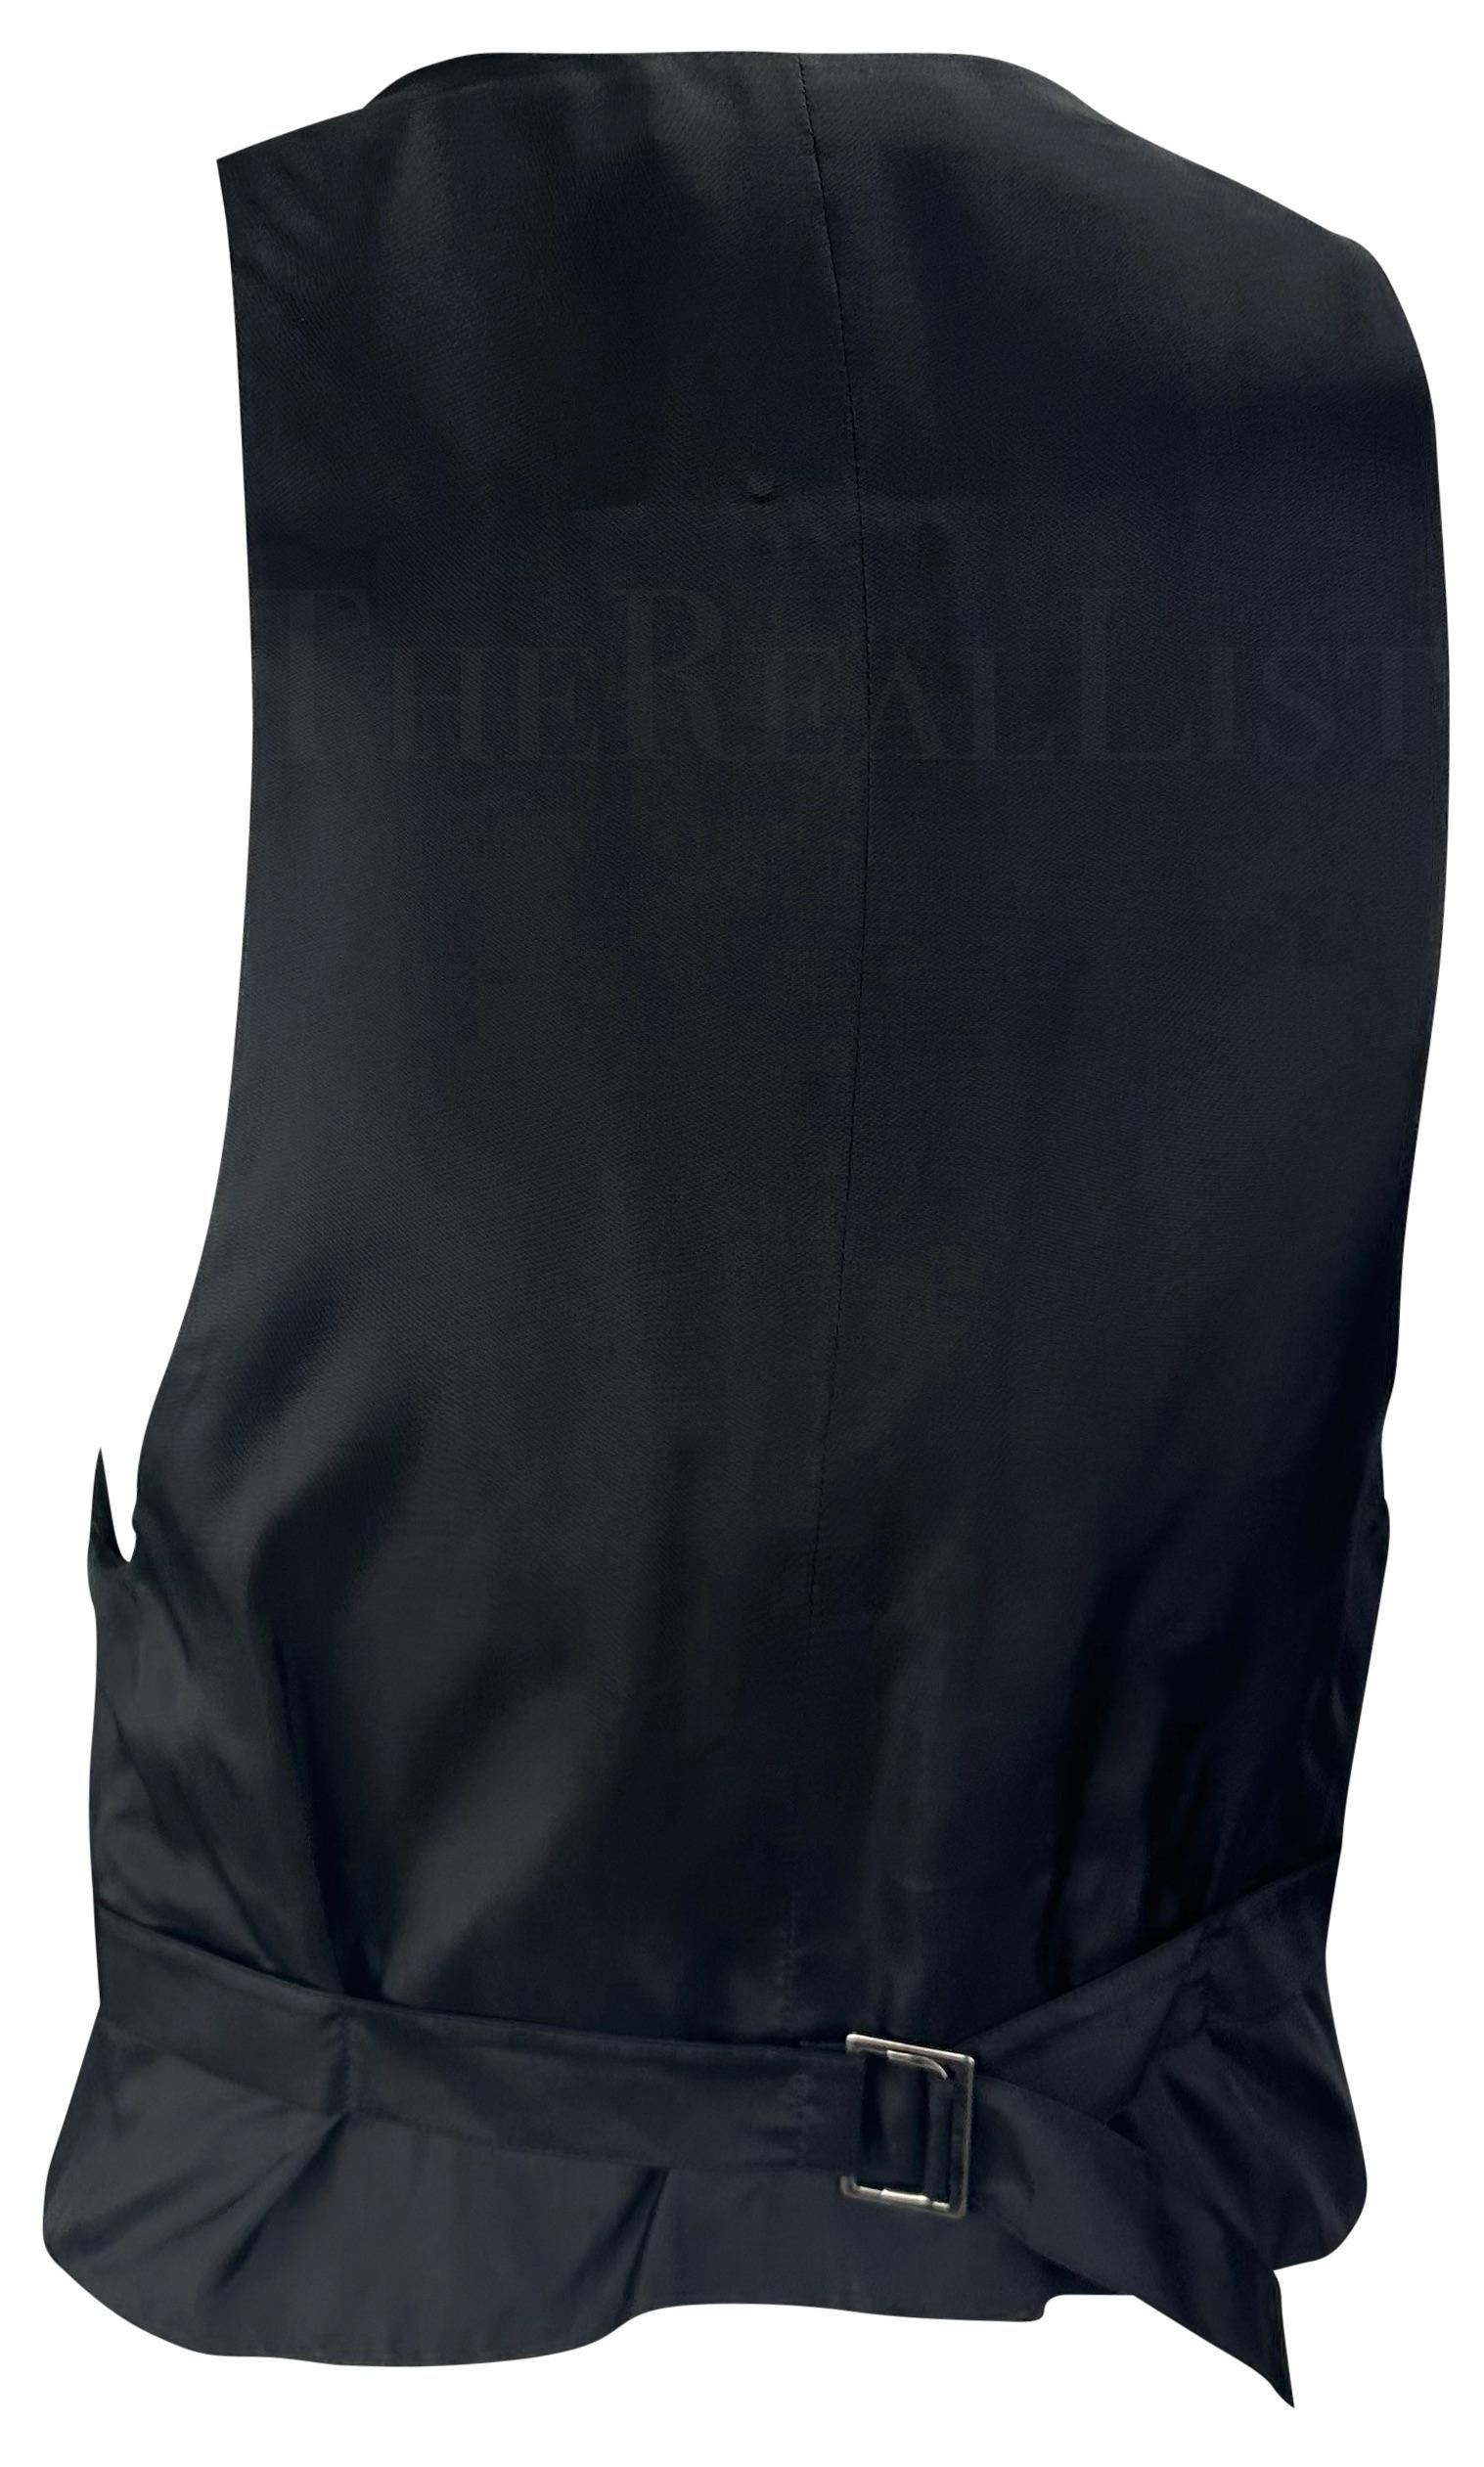 S/S 2001 Yves Saint Laurent by Tom Ford Runway Black Plunging Wool Vest  For Sale 2